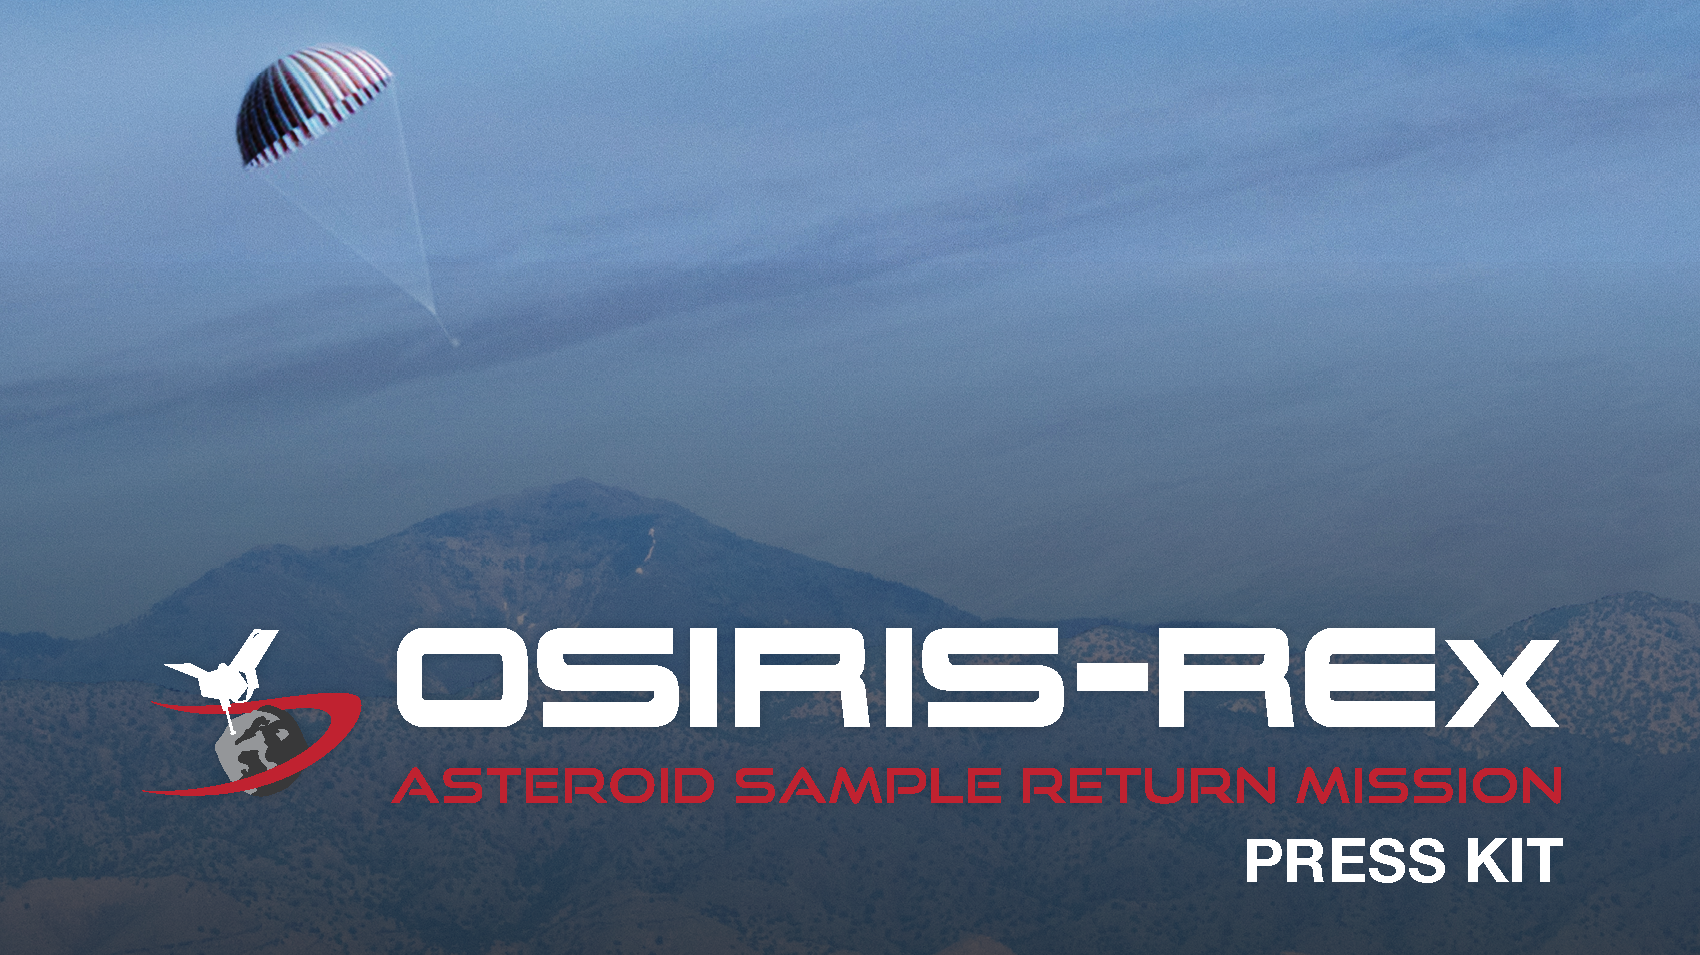 image of mountain landscape with graphic of parachute in upper left corner. "OSIRIS-REx Asteroid Sample Return Press Kit" text is white and red. The mission logo is to the left of the text. "